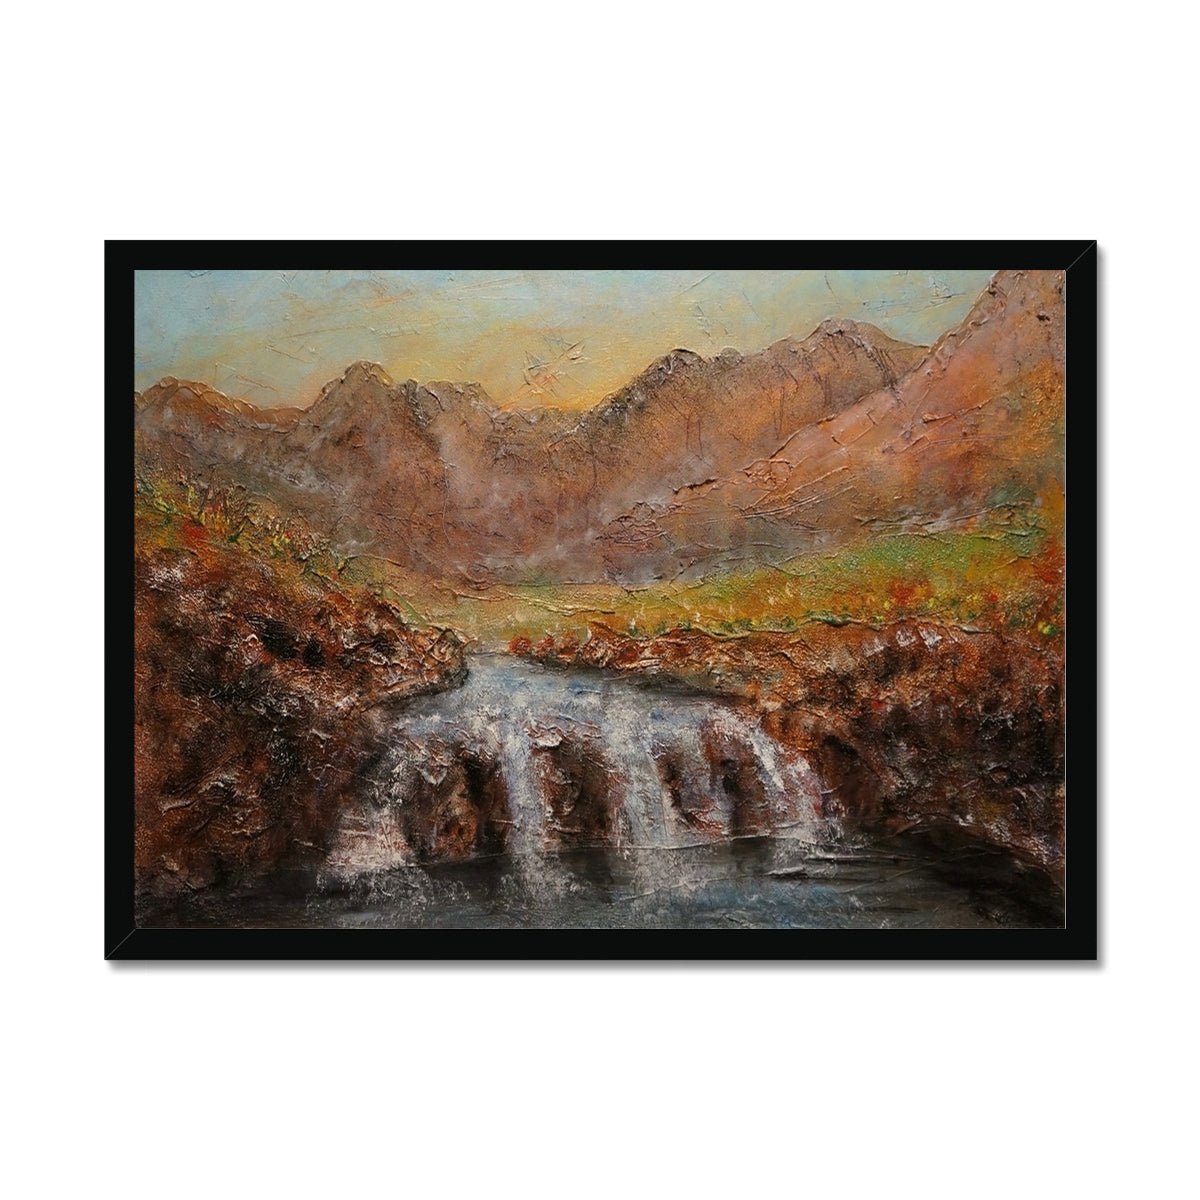 Fairy Pools Dawn Skye Painting | Framed Prints From Scotland-Framed Prints-Skye Art Gallery-A2 Landscape-Black Frame-Paintings, Prints, Homeware, Art Gifts From Scotland By Scottish Artist Kevin Hunter